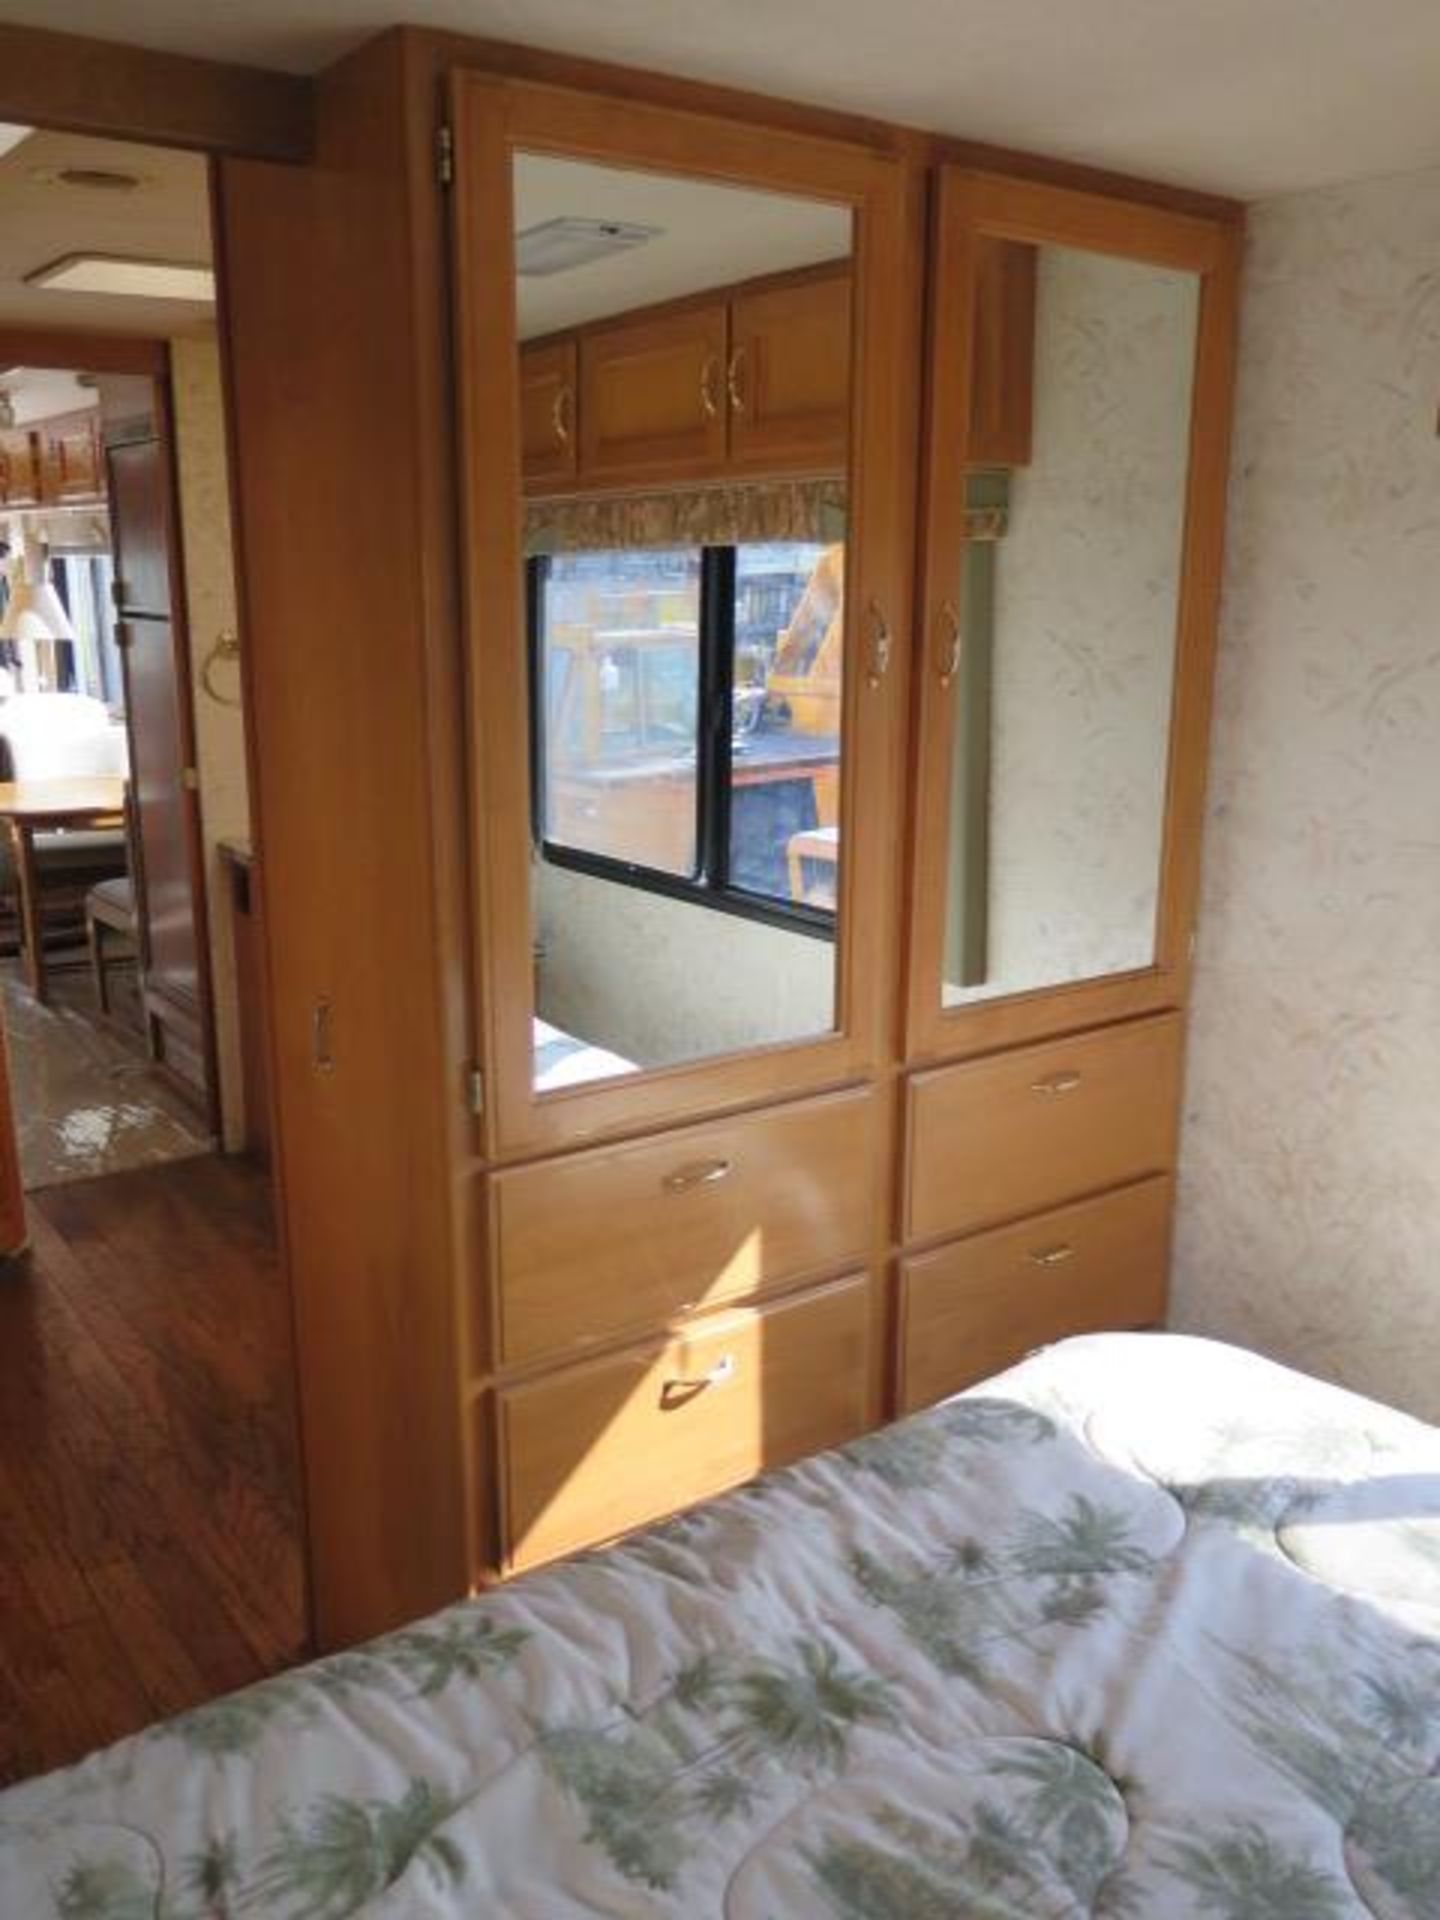 1997 Safari Motor Coacher Motor Home Lisc# 5PEJ100 w/ CAT Diesel Engine, Automatic Trans, SOLD AS IS - Image 47 of 54